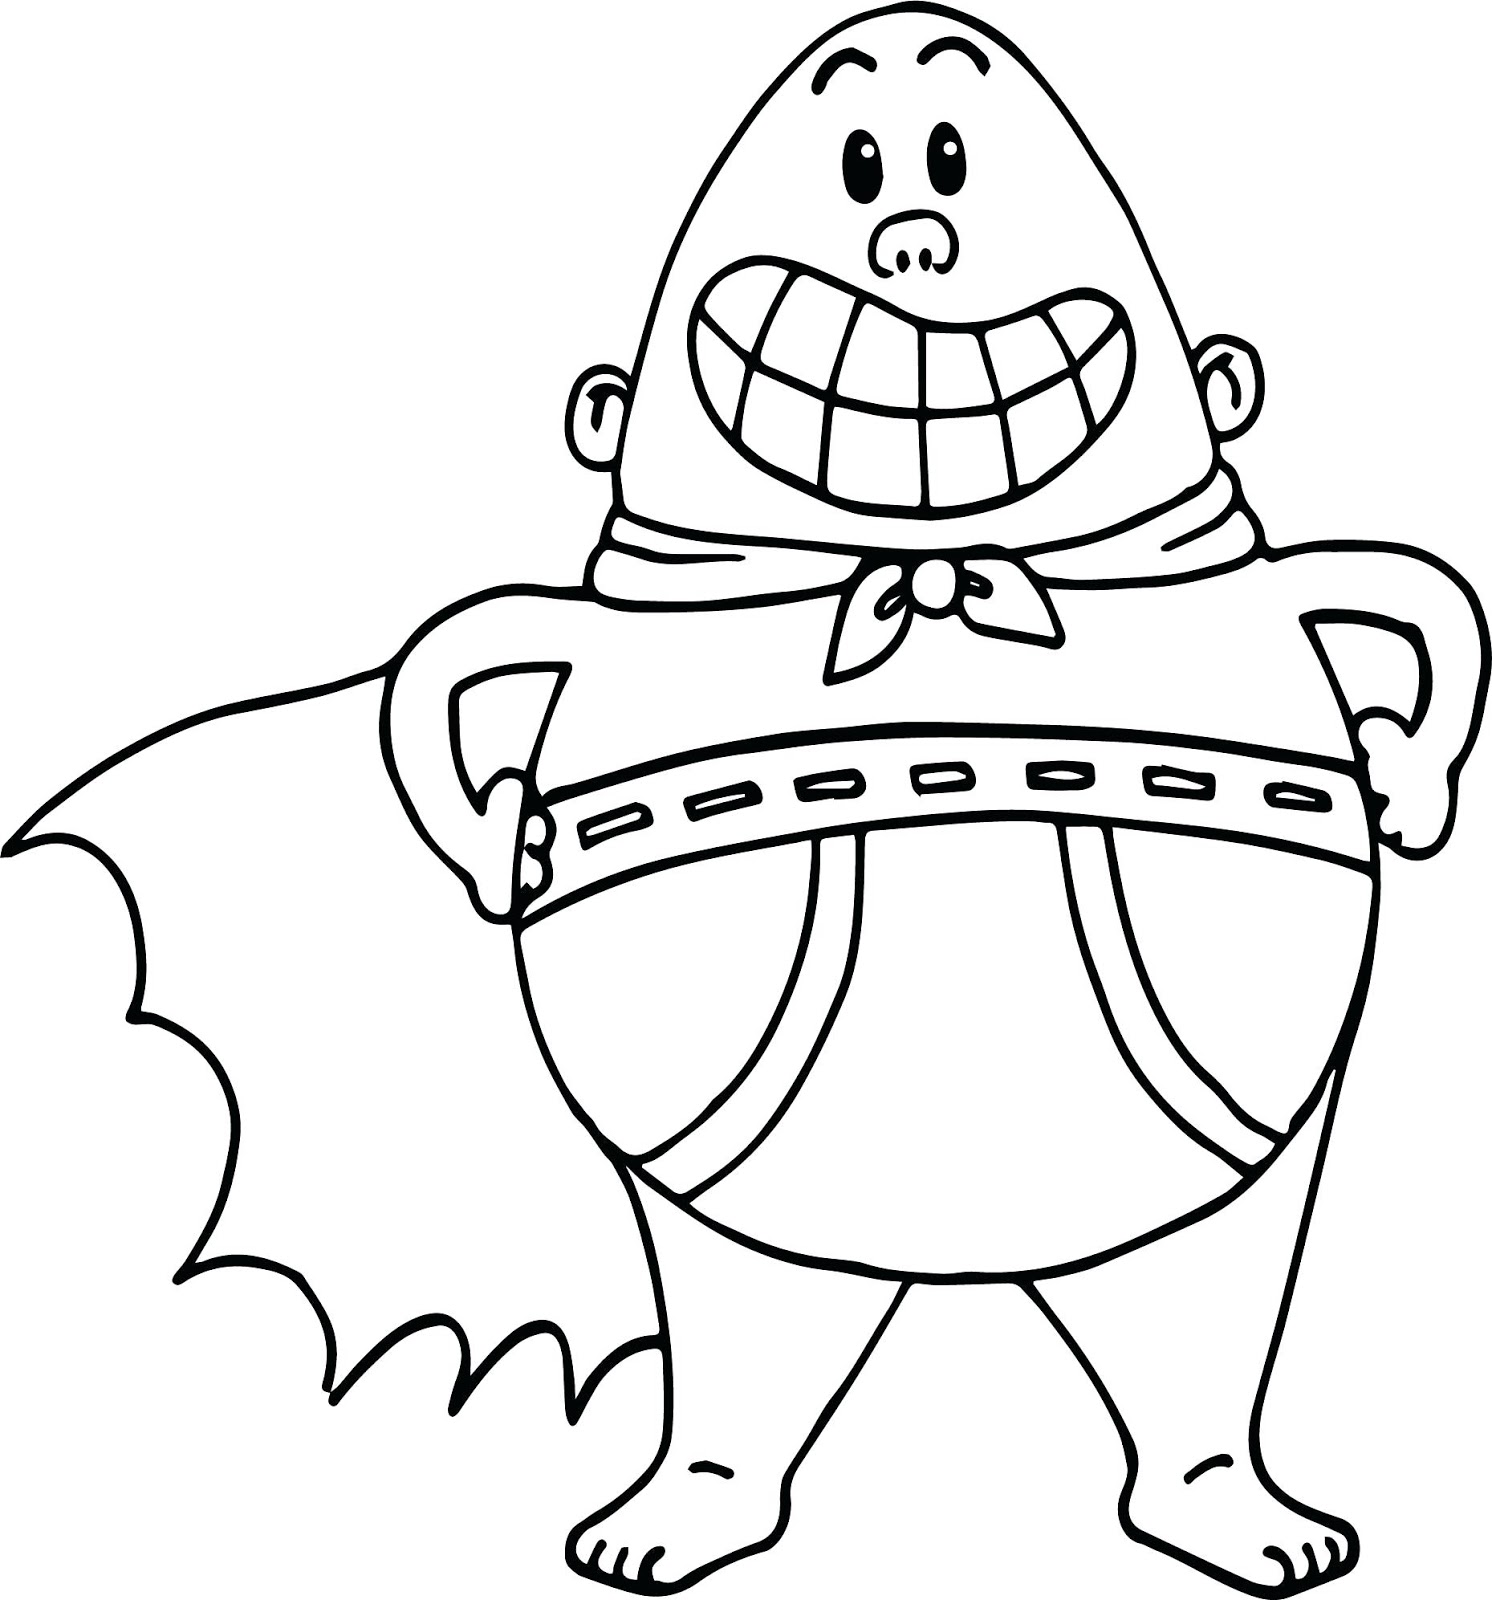 Captain Underpants Coloring Page Free Printable Coloring Pages For Kids